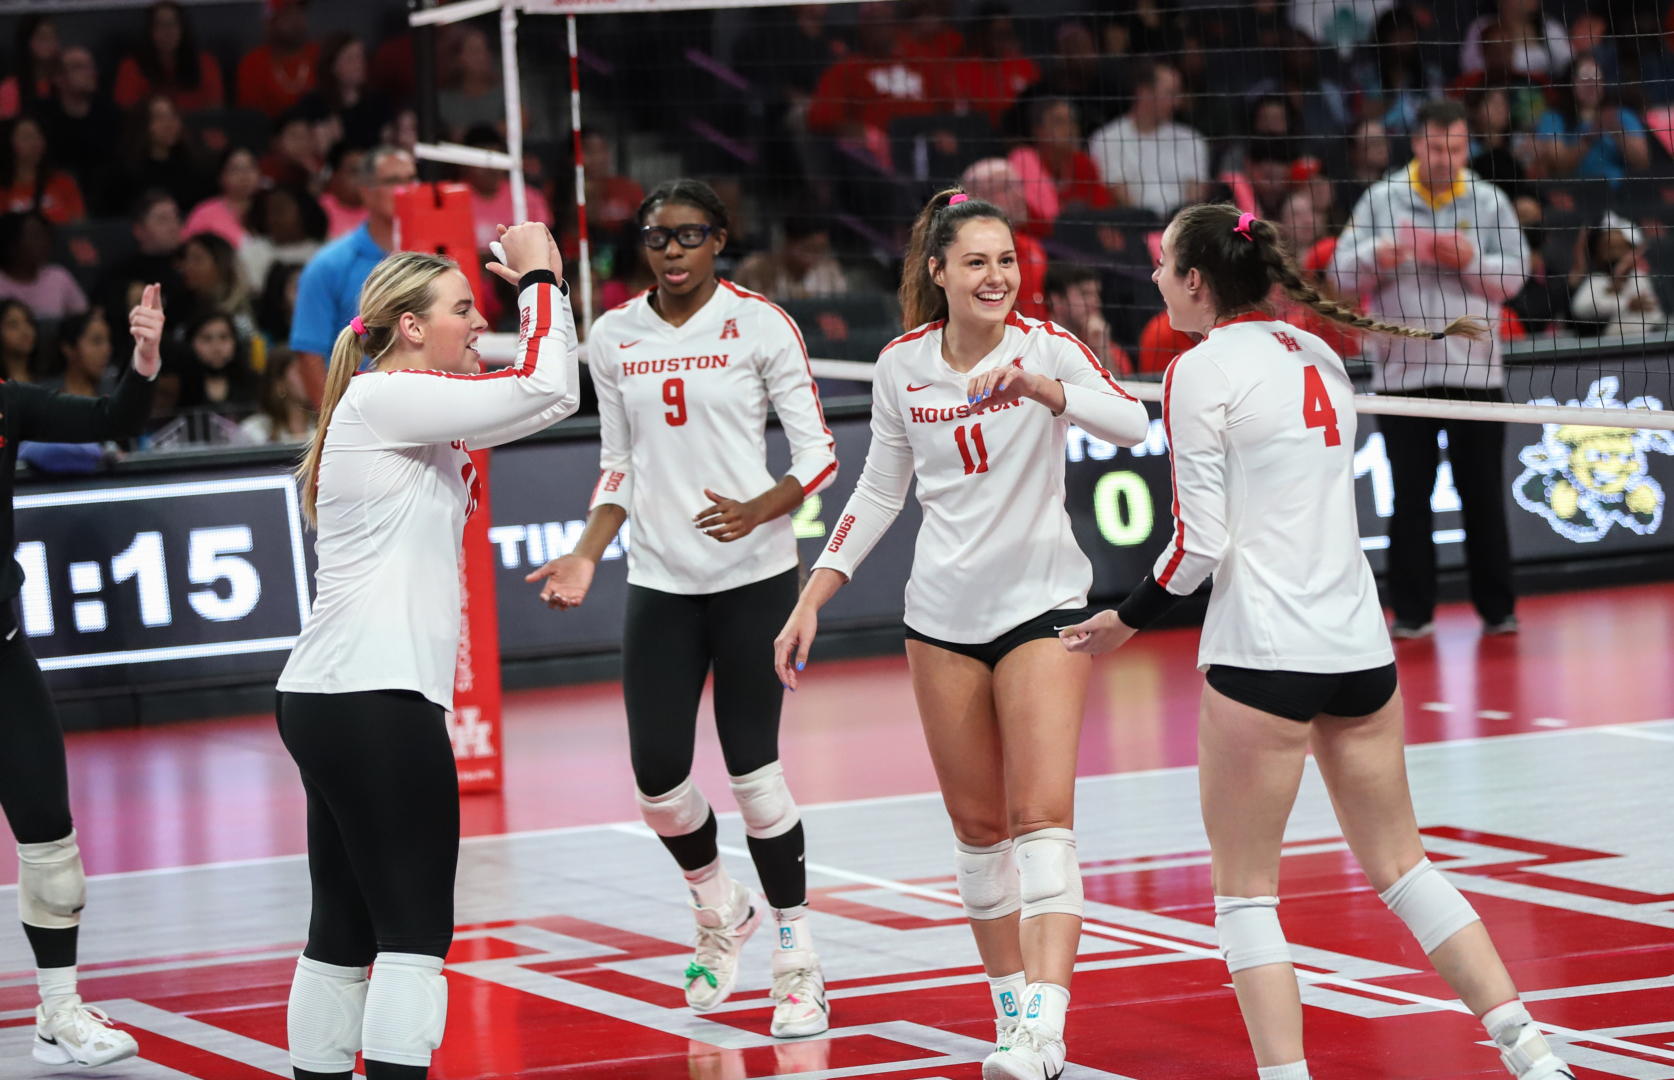 UH volleyball finished its final season in the AAC as co-champions and is headed to the NCAA Tournament for the first time since 2000. | Sean Thomas/The Cougar